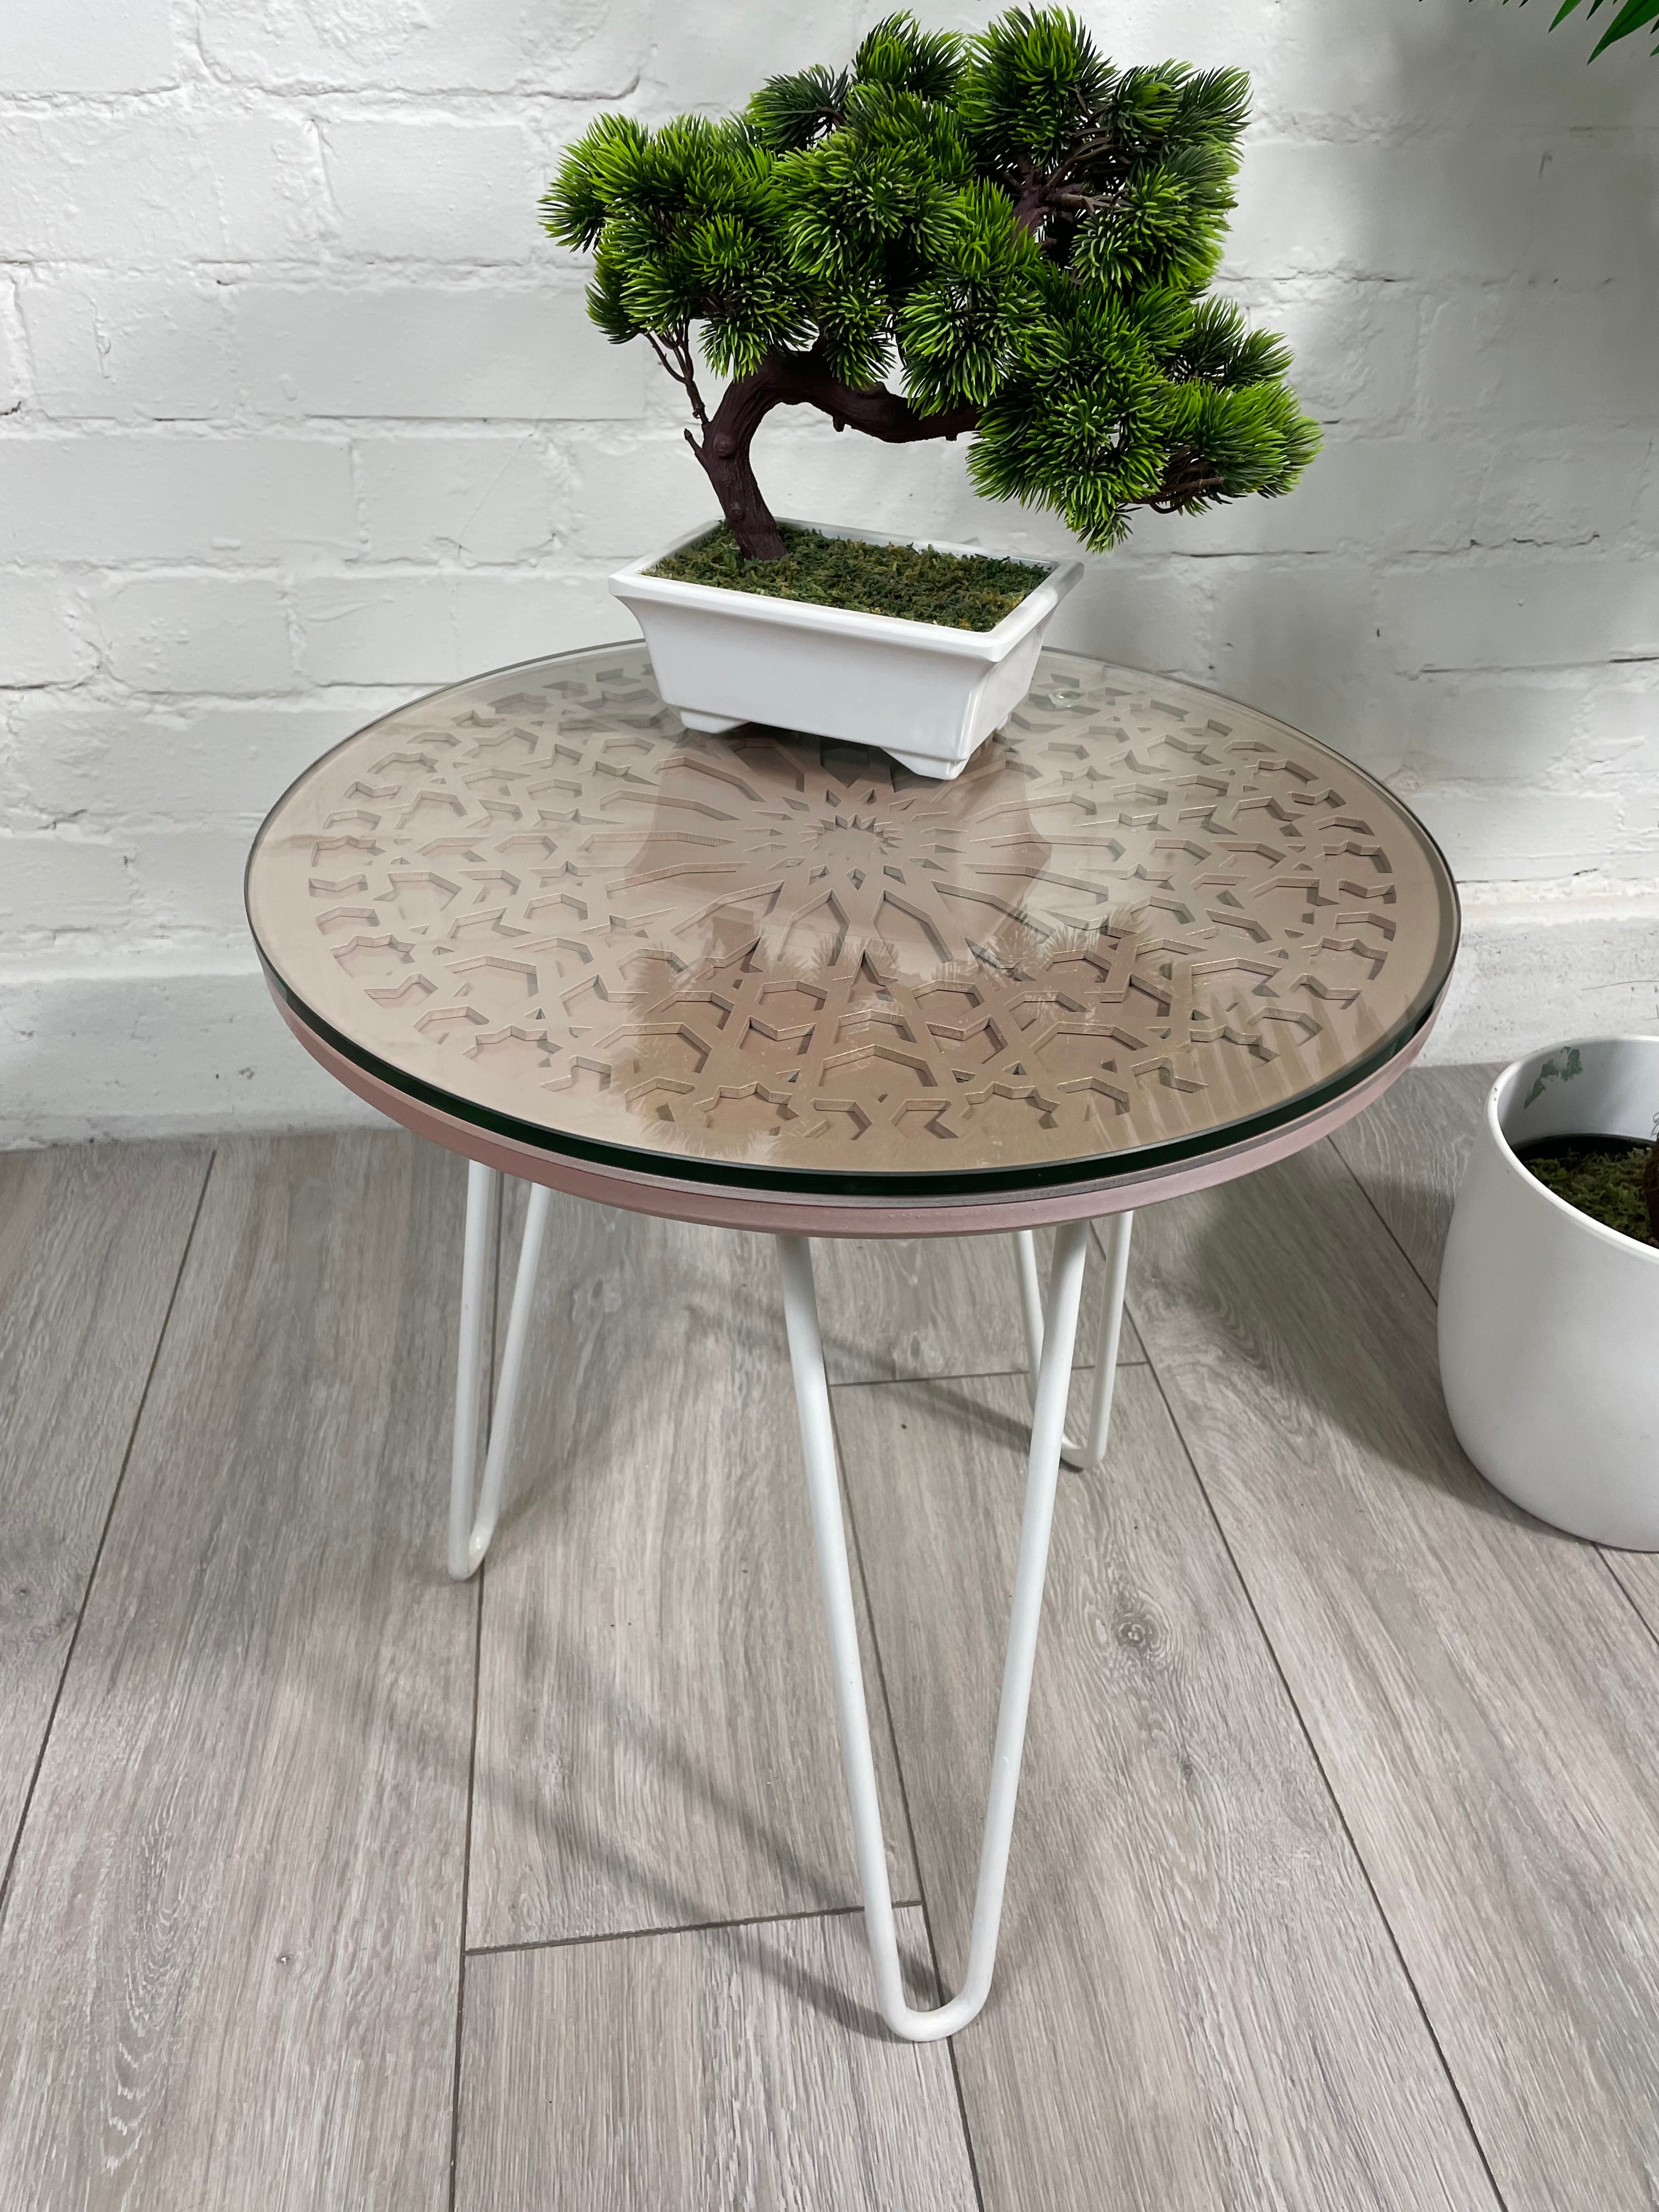 Moroccan Mosaic Side Table Pin Legs, Zellige Table In Pastel Dusty Pink with Glass Top